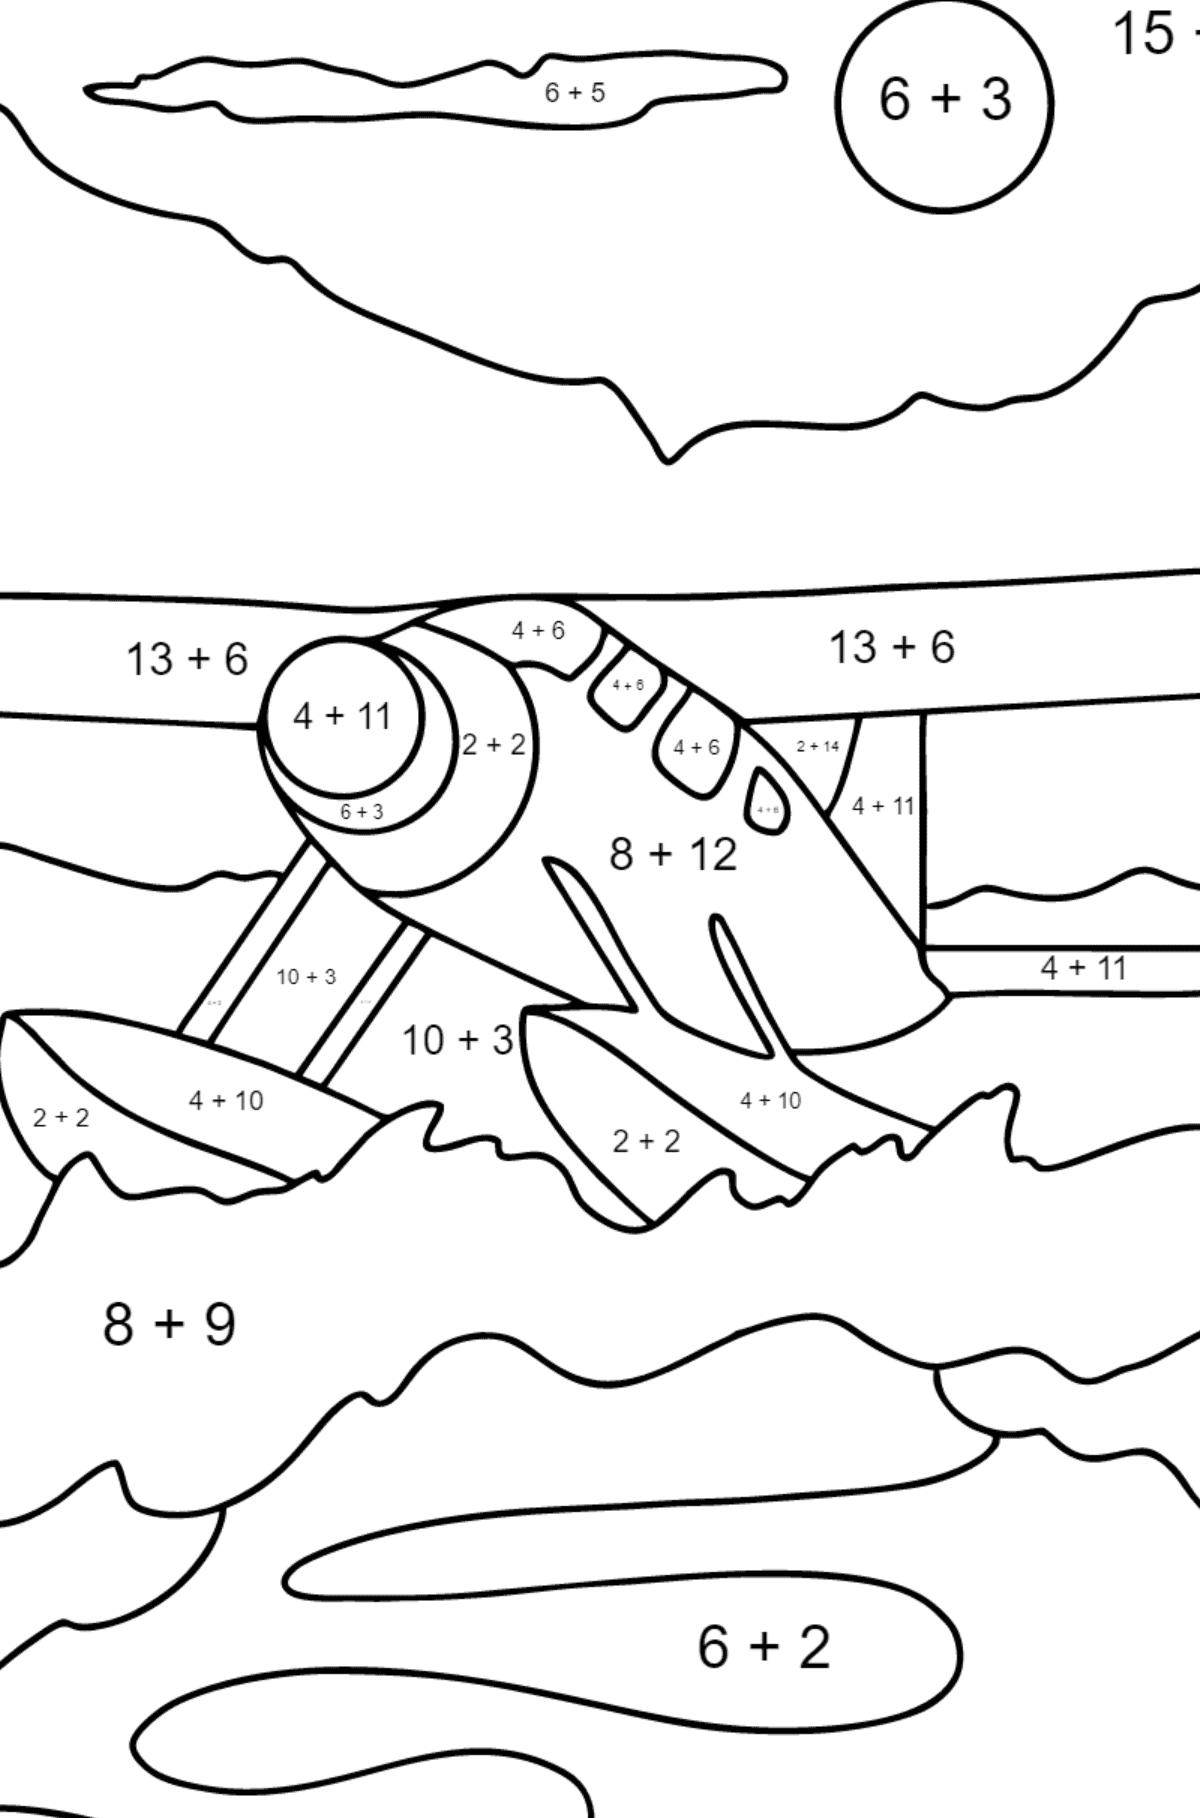 Coloring Page - A Hydroplane - Math Coloring - Addition for Children